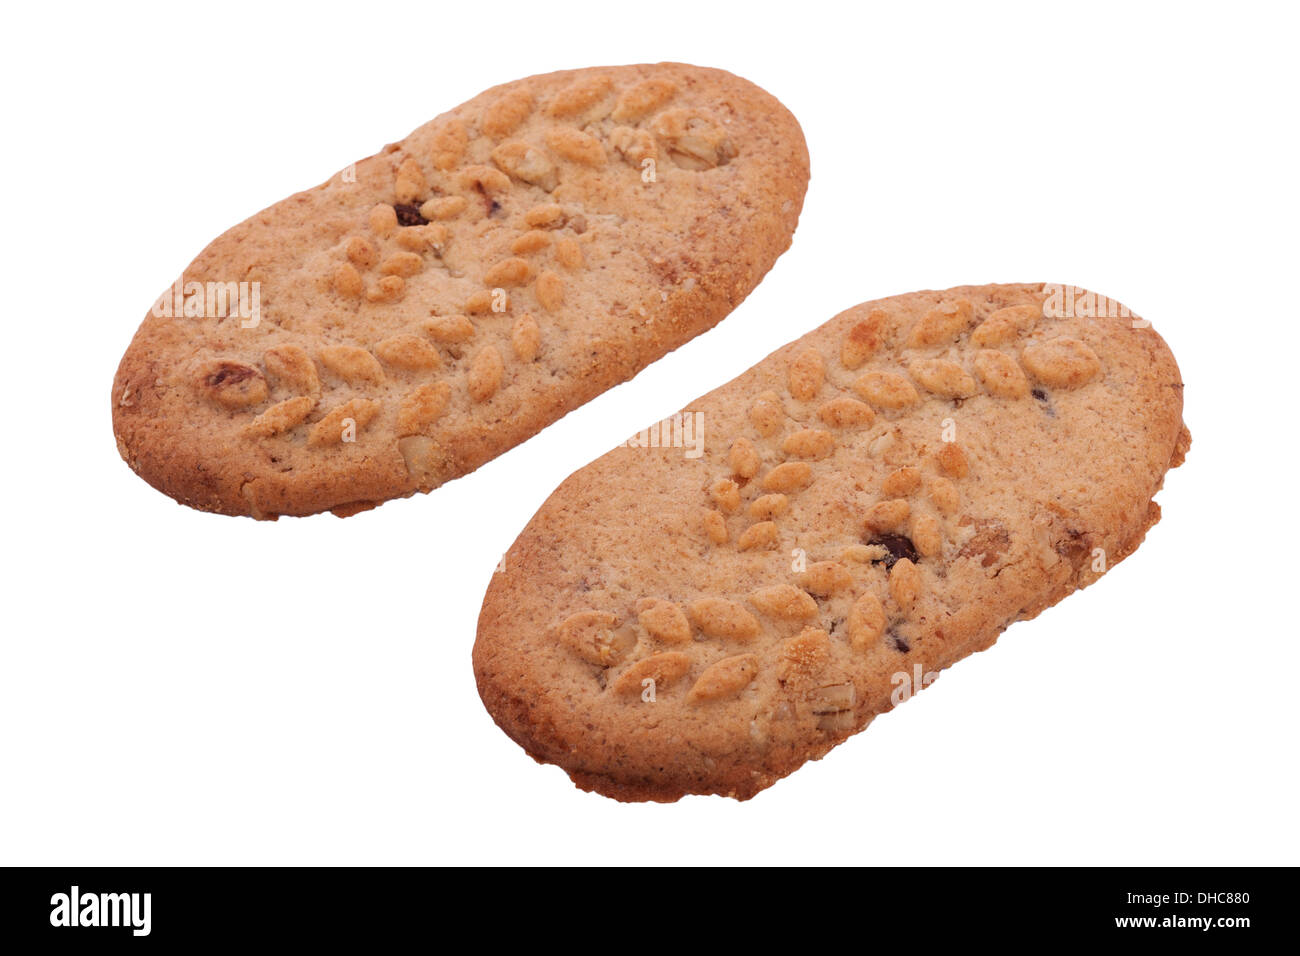 Two Nabisco belvita breakfast biscuits on a white background Stock Photo